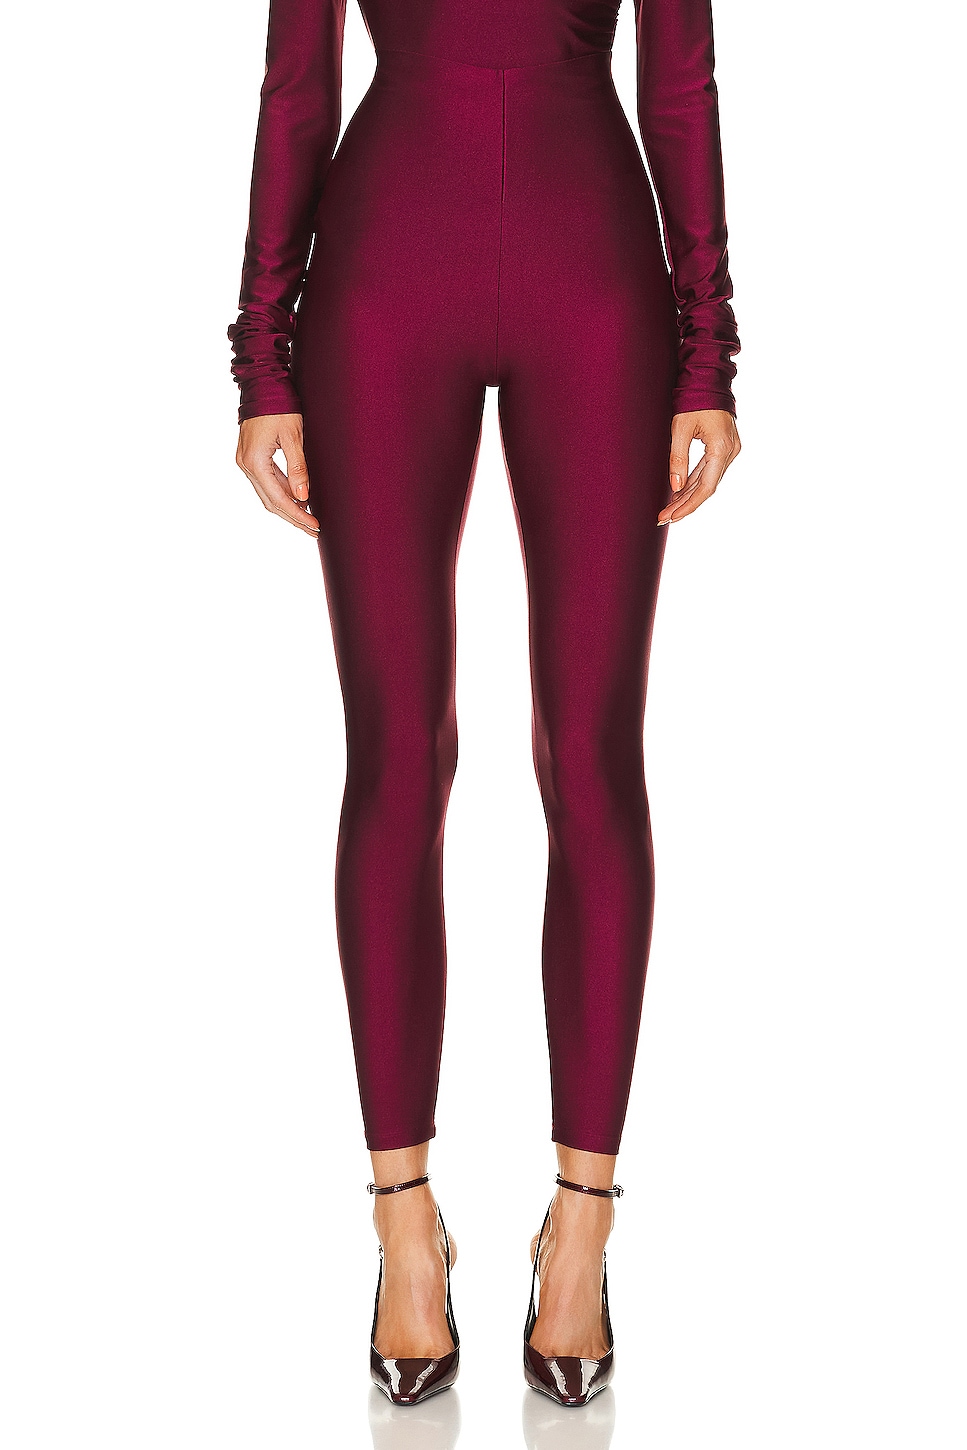 Image 1 of The Andamane Holly 80s Legging in Ruby